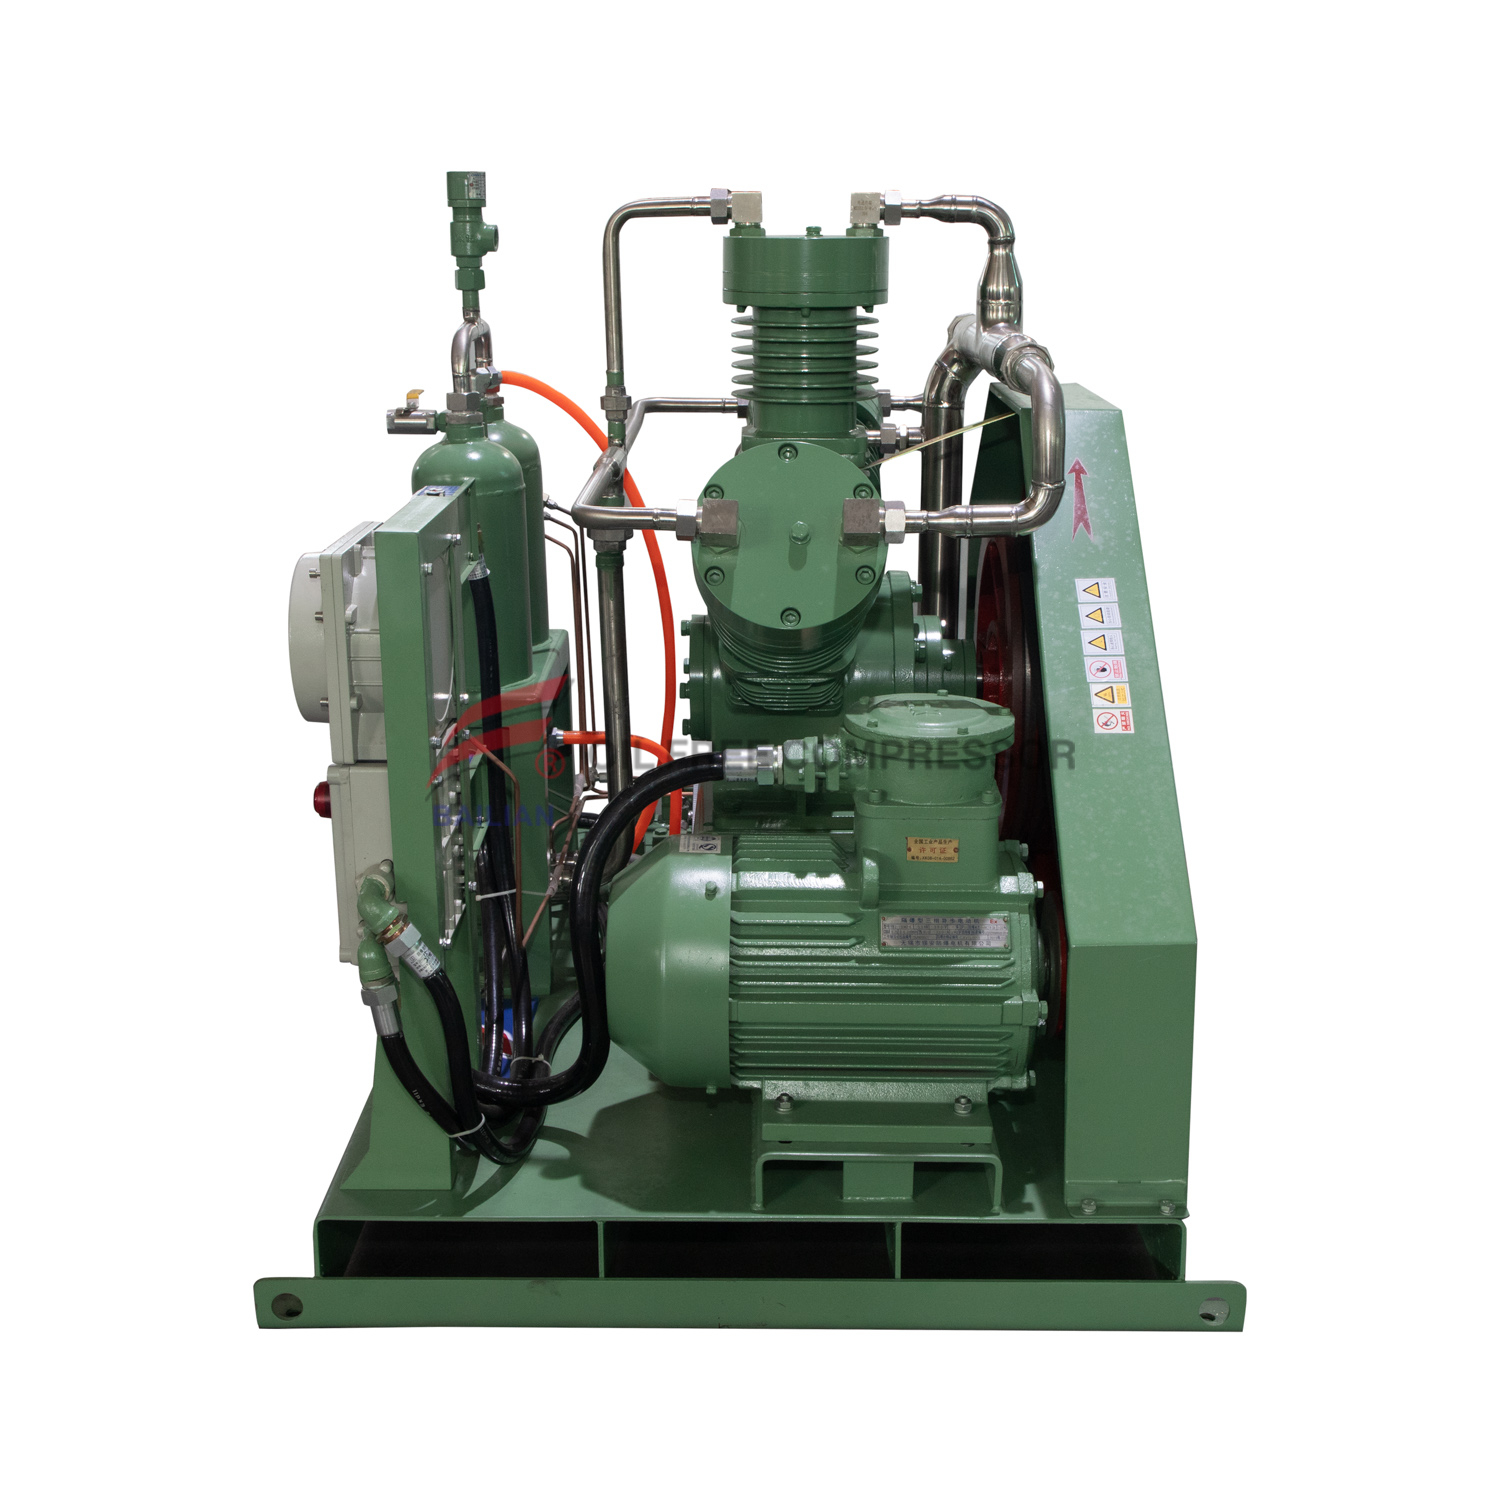 HW-35/1-10 W-shaped Sled Mounted Completely Oil-free Piston Type H2 Compressor